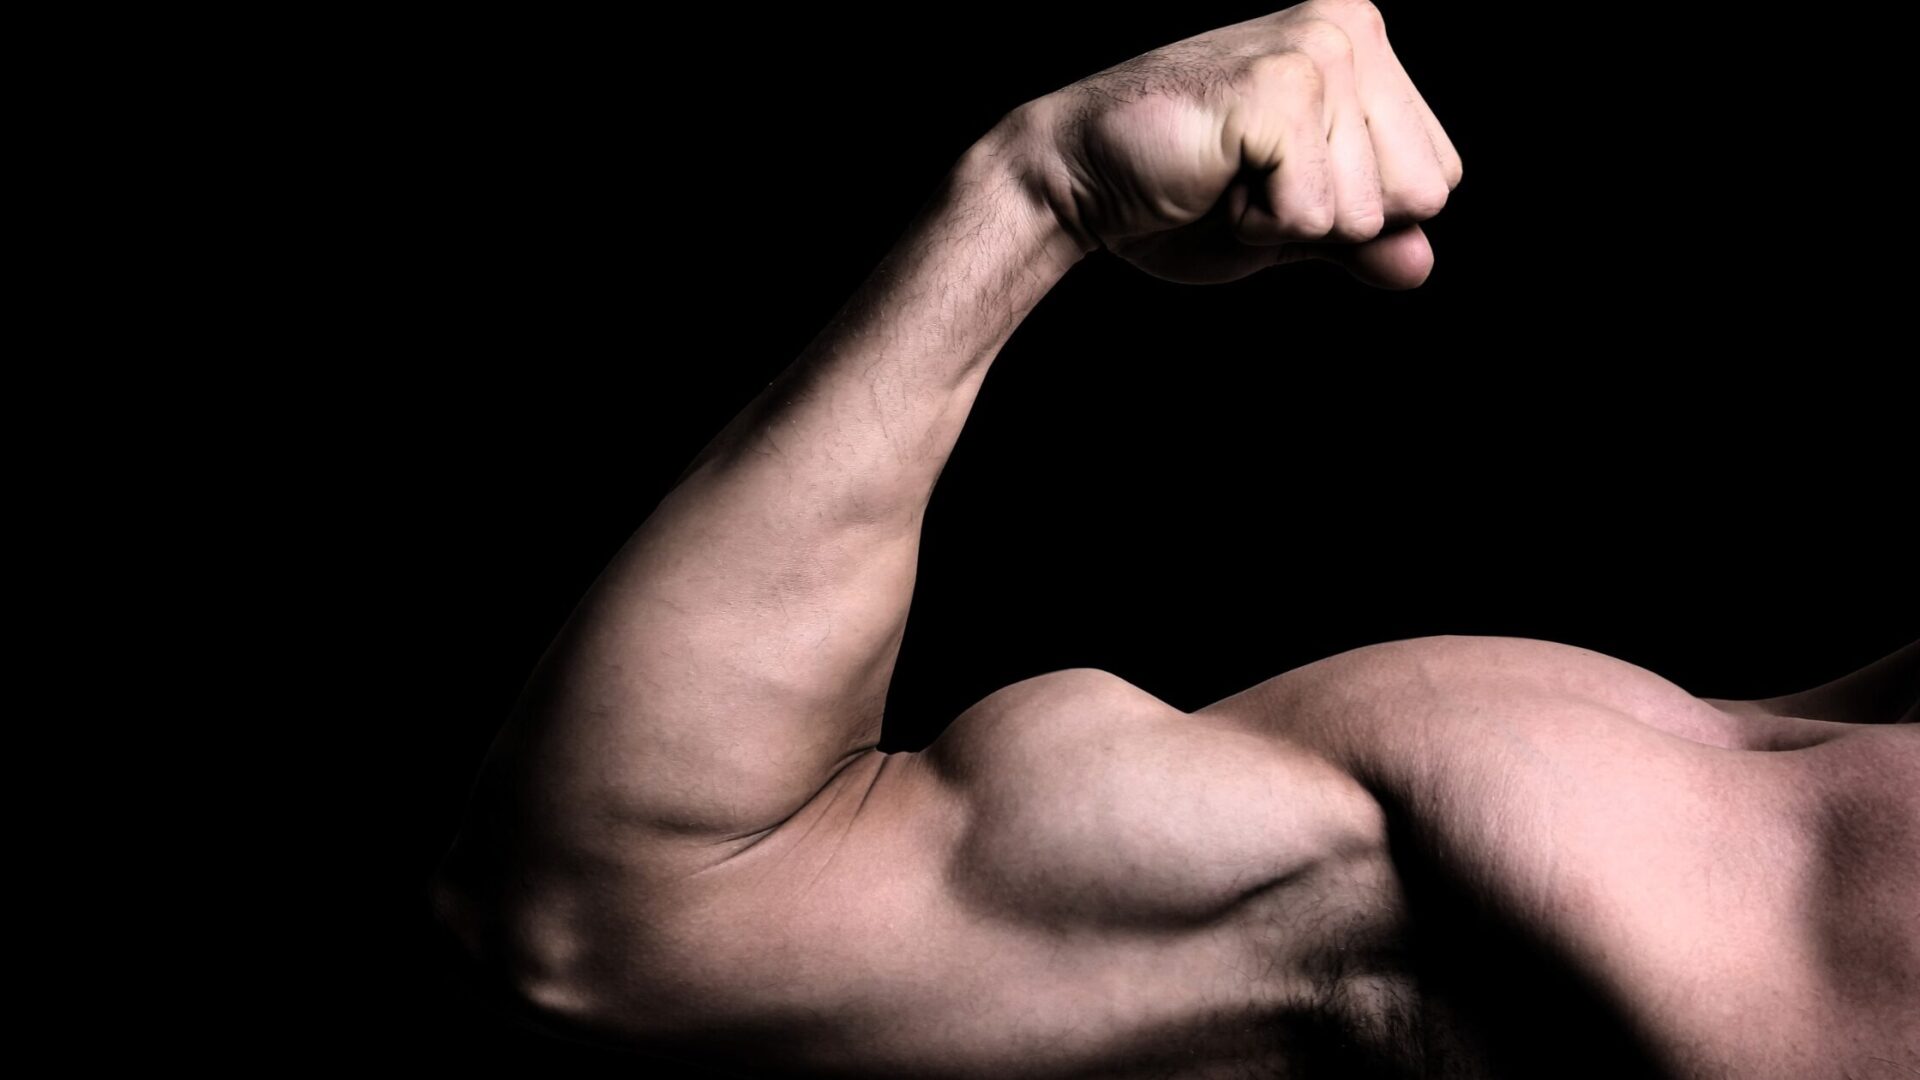 How to get bigger biceps at home